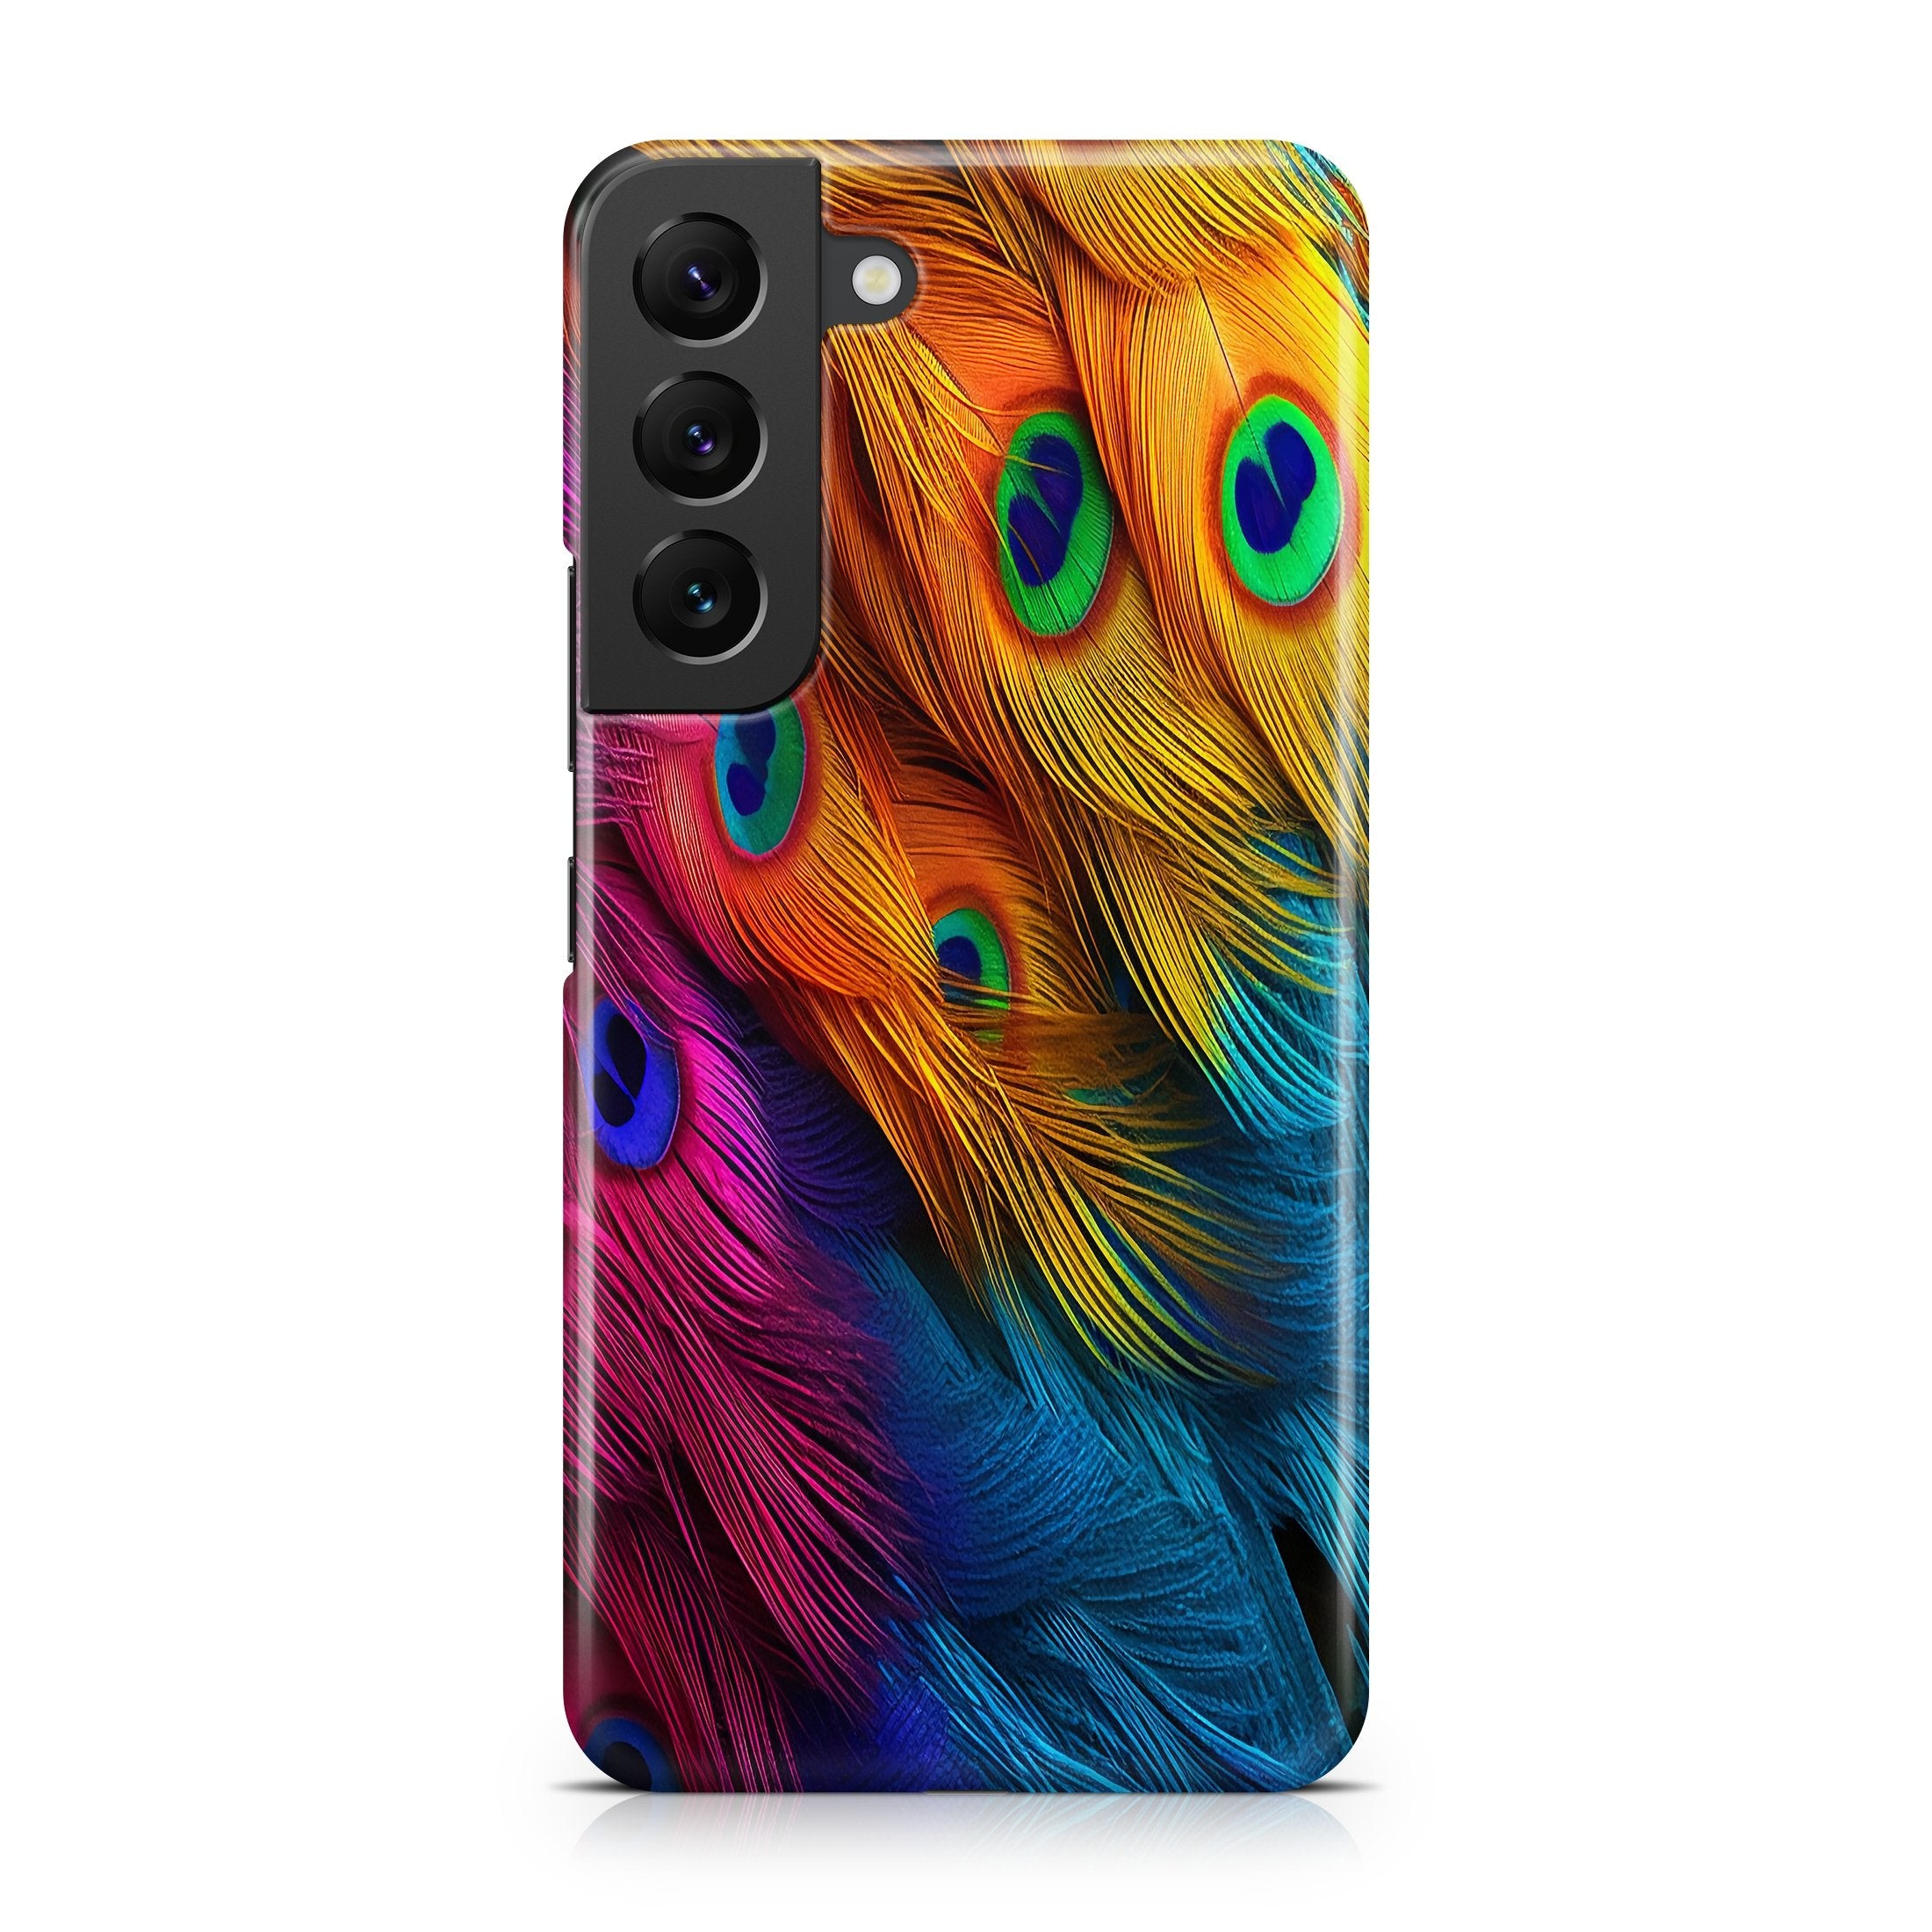 Complex Peacock - Samsung phone case designs by CaseSwagger